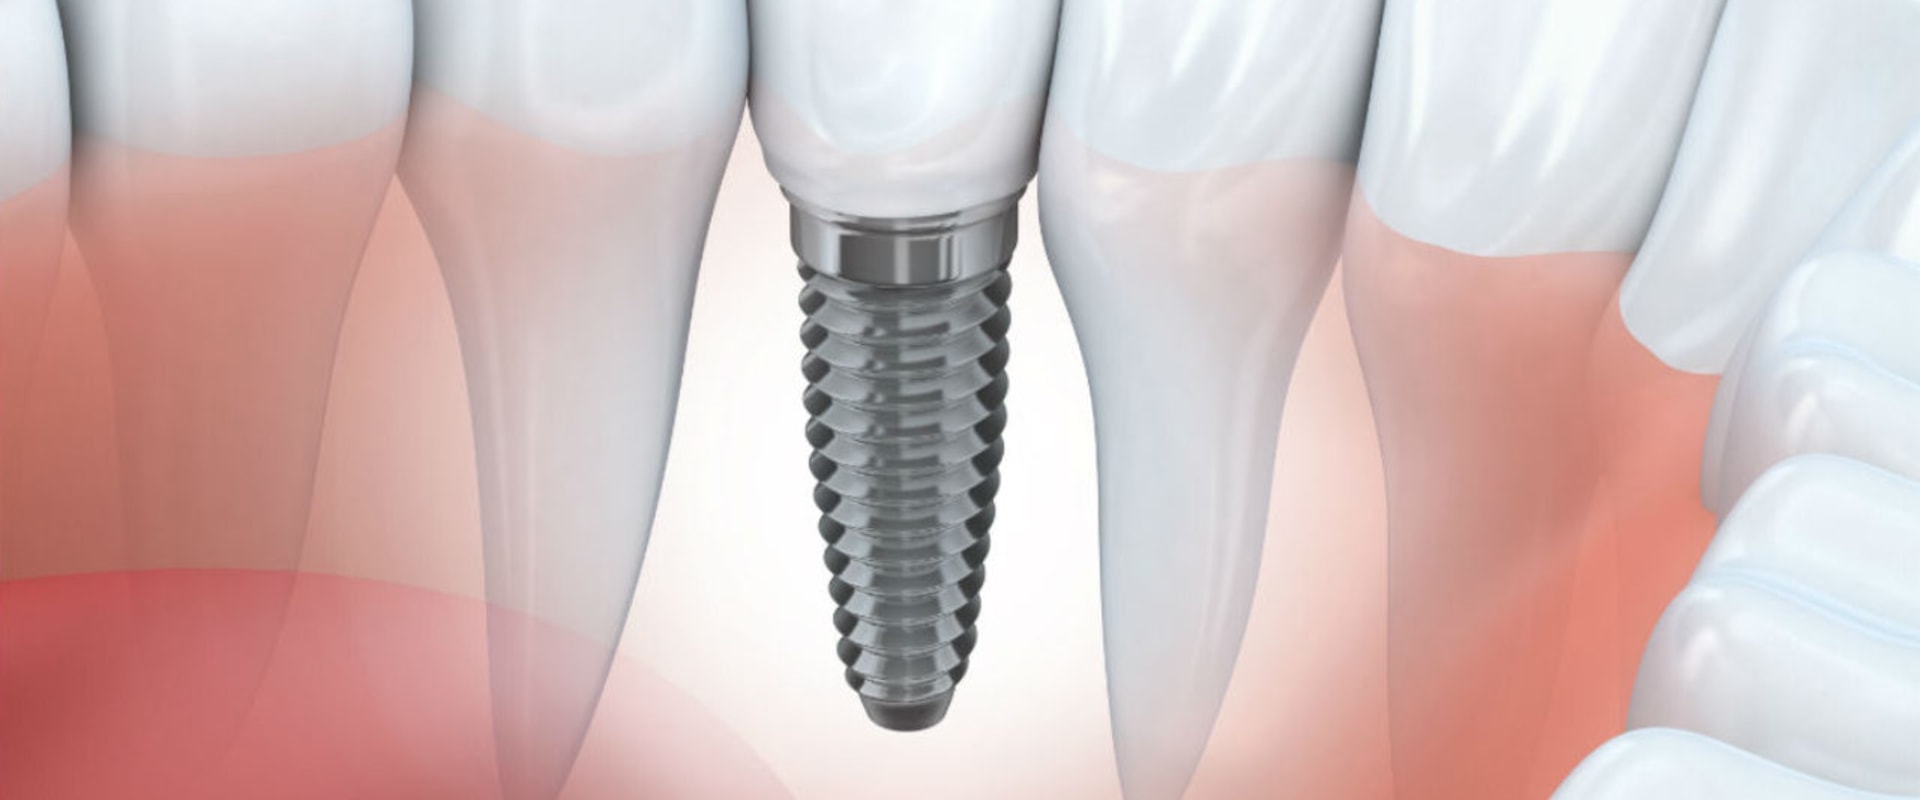 Definition of dental implant of whom?